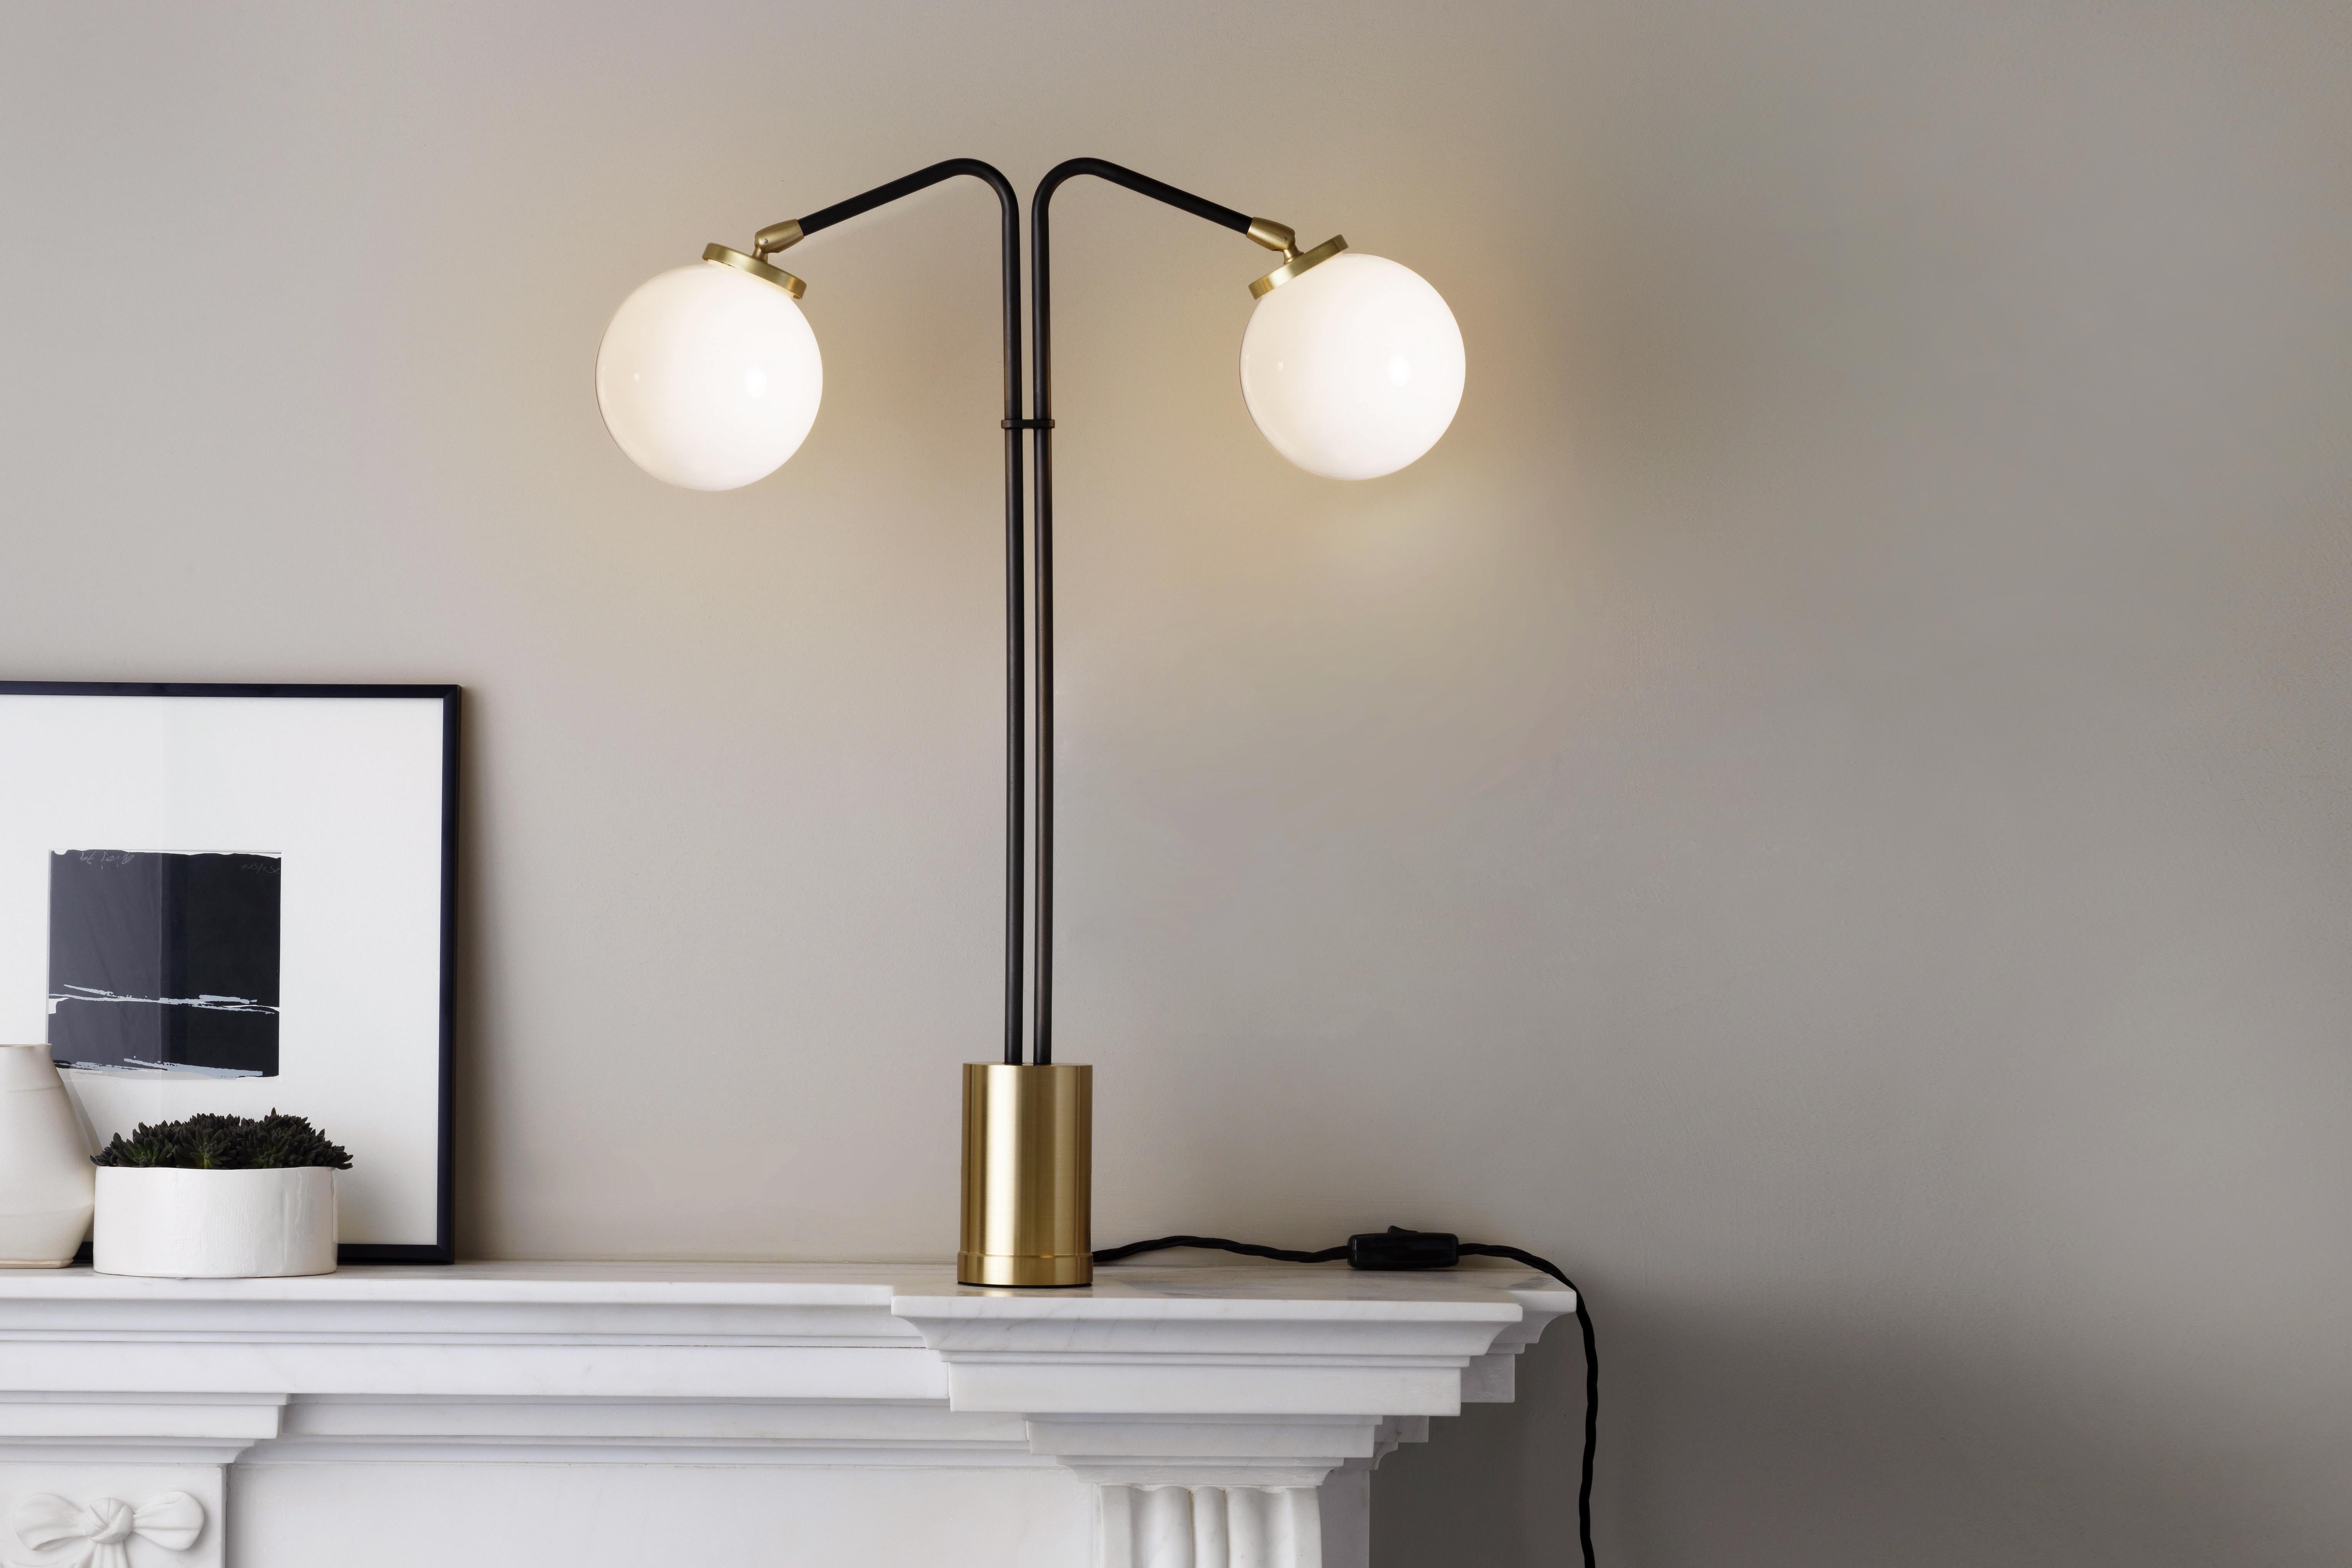 Array twin opal table lamp by CTO lighting
Materials: bronze with satin brass base and opal glass shade.
Dimensions: W 41 x D 12 x H 60 cm 

All our lamps can be wired according to each country. If sold to the USA it will be wired for the USA for